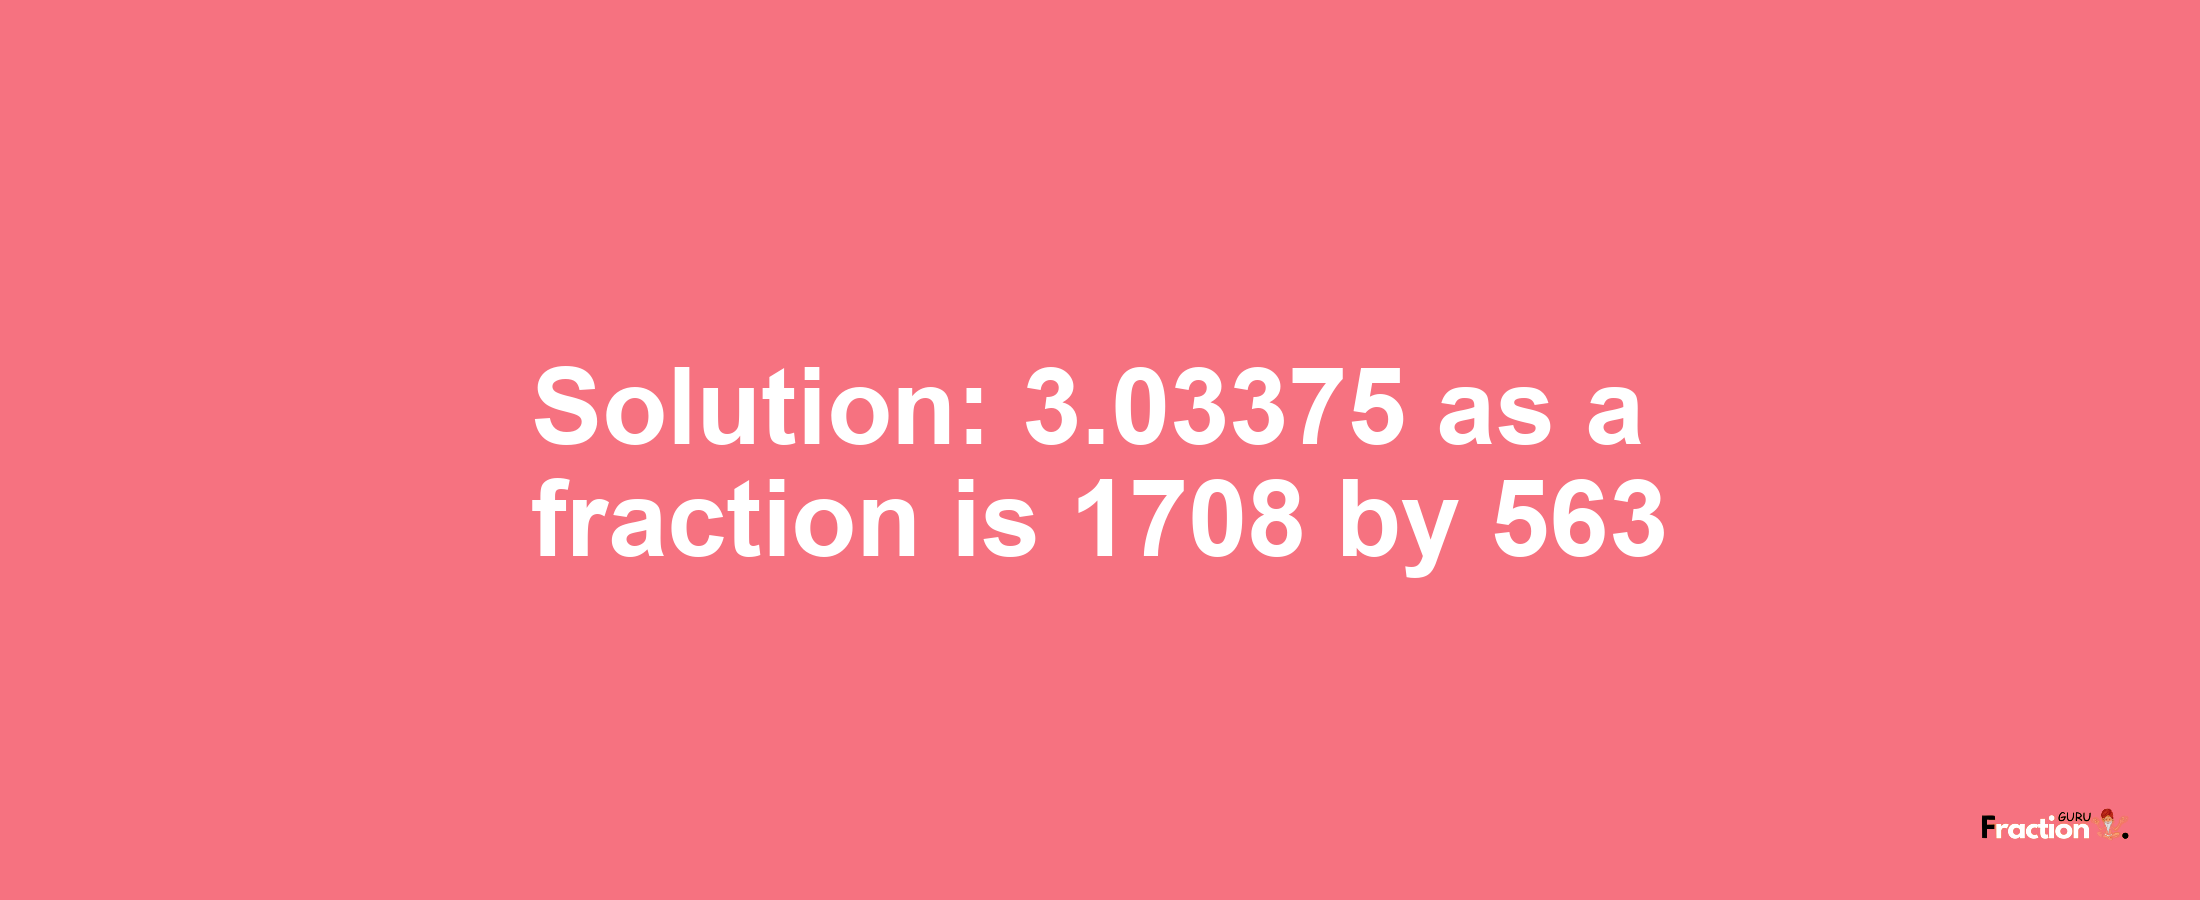 Solution:3.03375 as a fraction is 1708/563